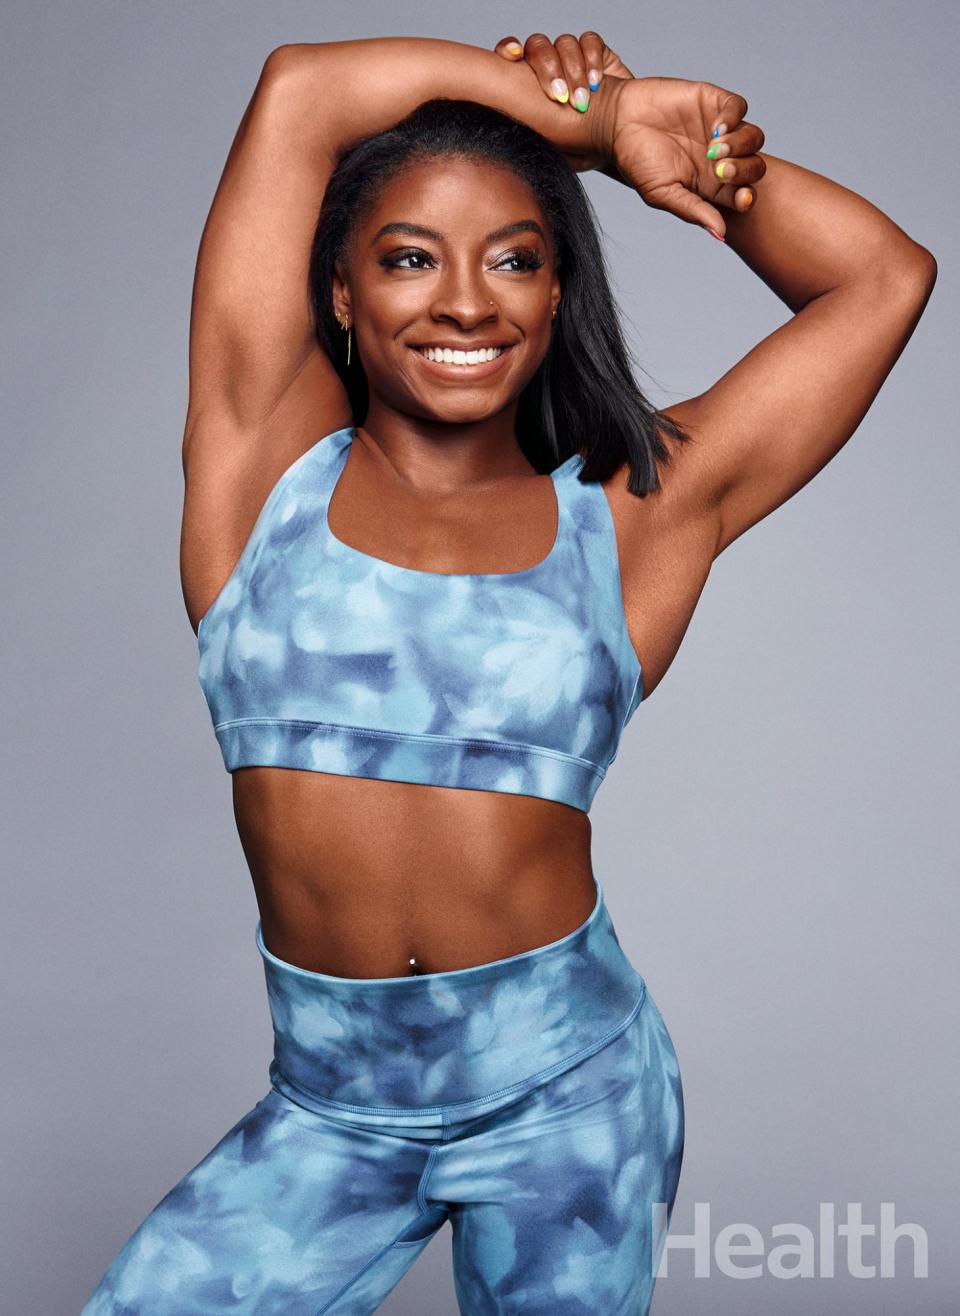 'I Don't Have to Be Fine': Everything Simone Biles Has Said About Mental Health